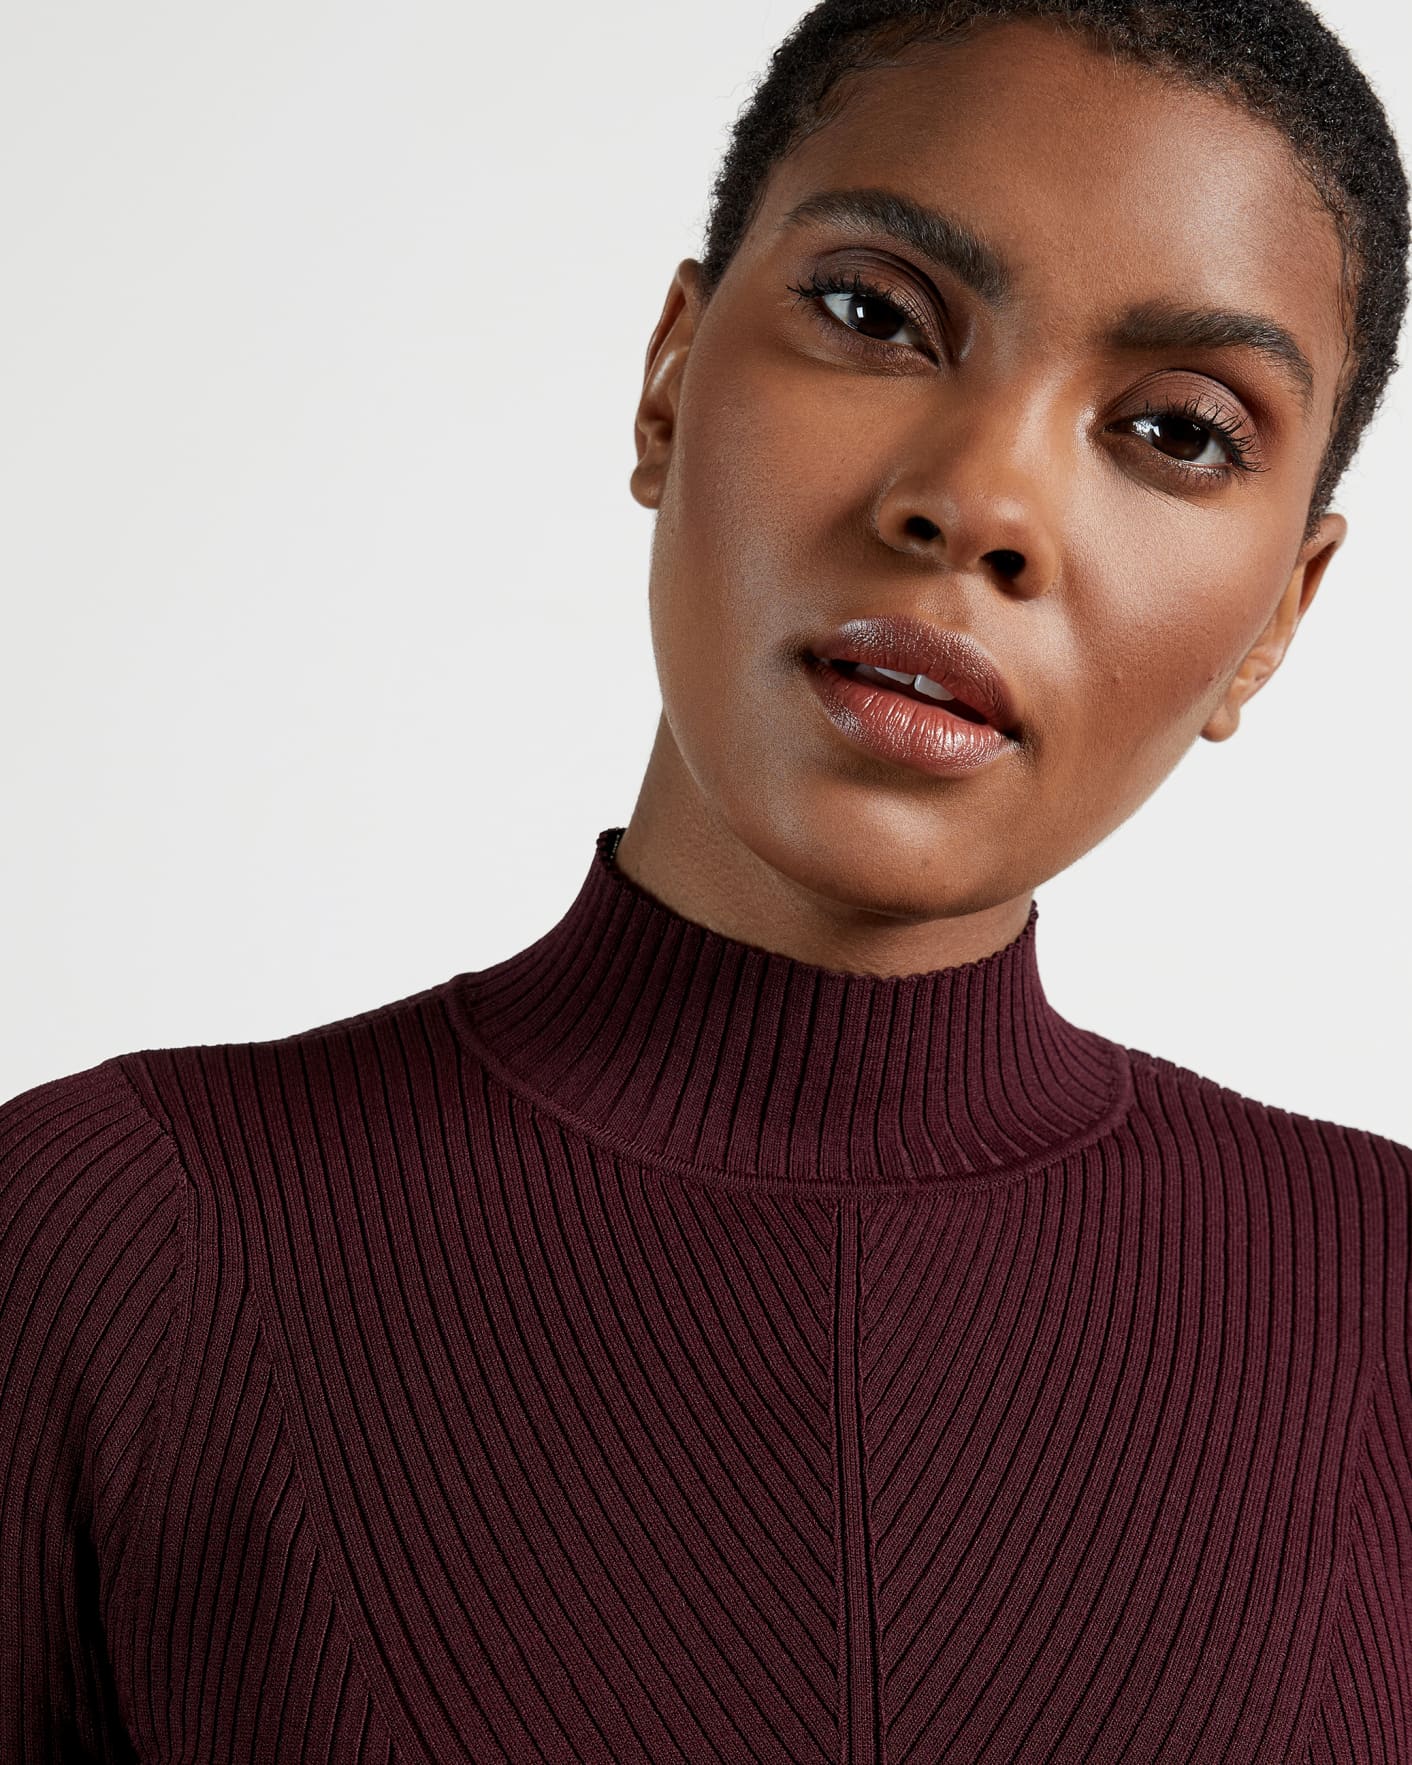 Oxblood High Neck Sweater Ted Baker